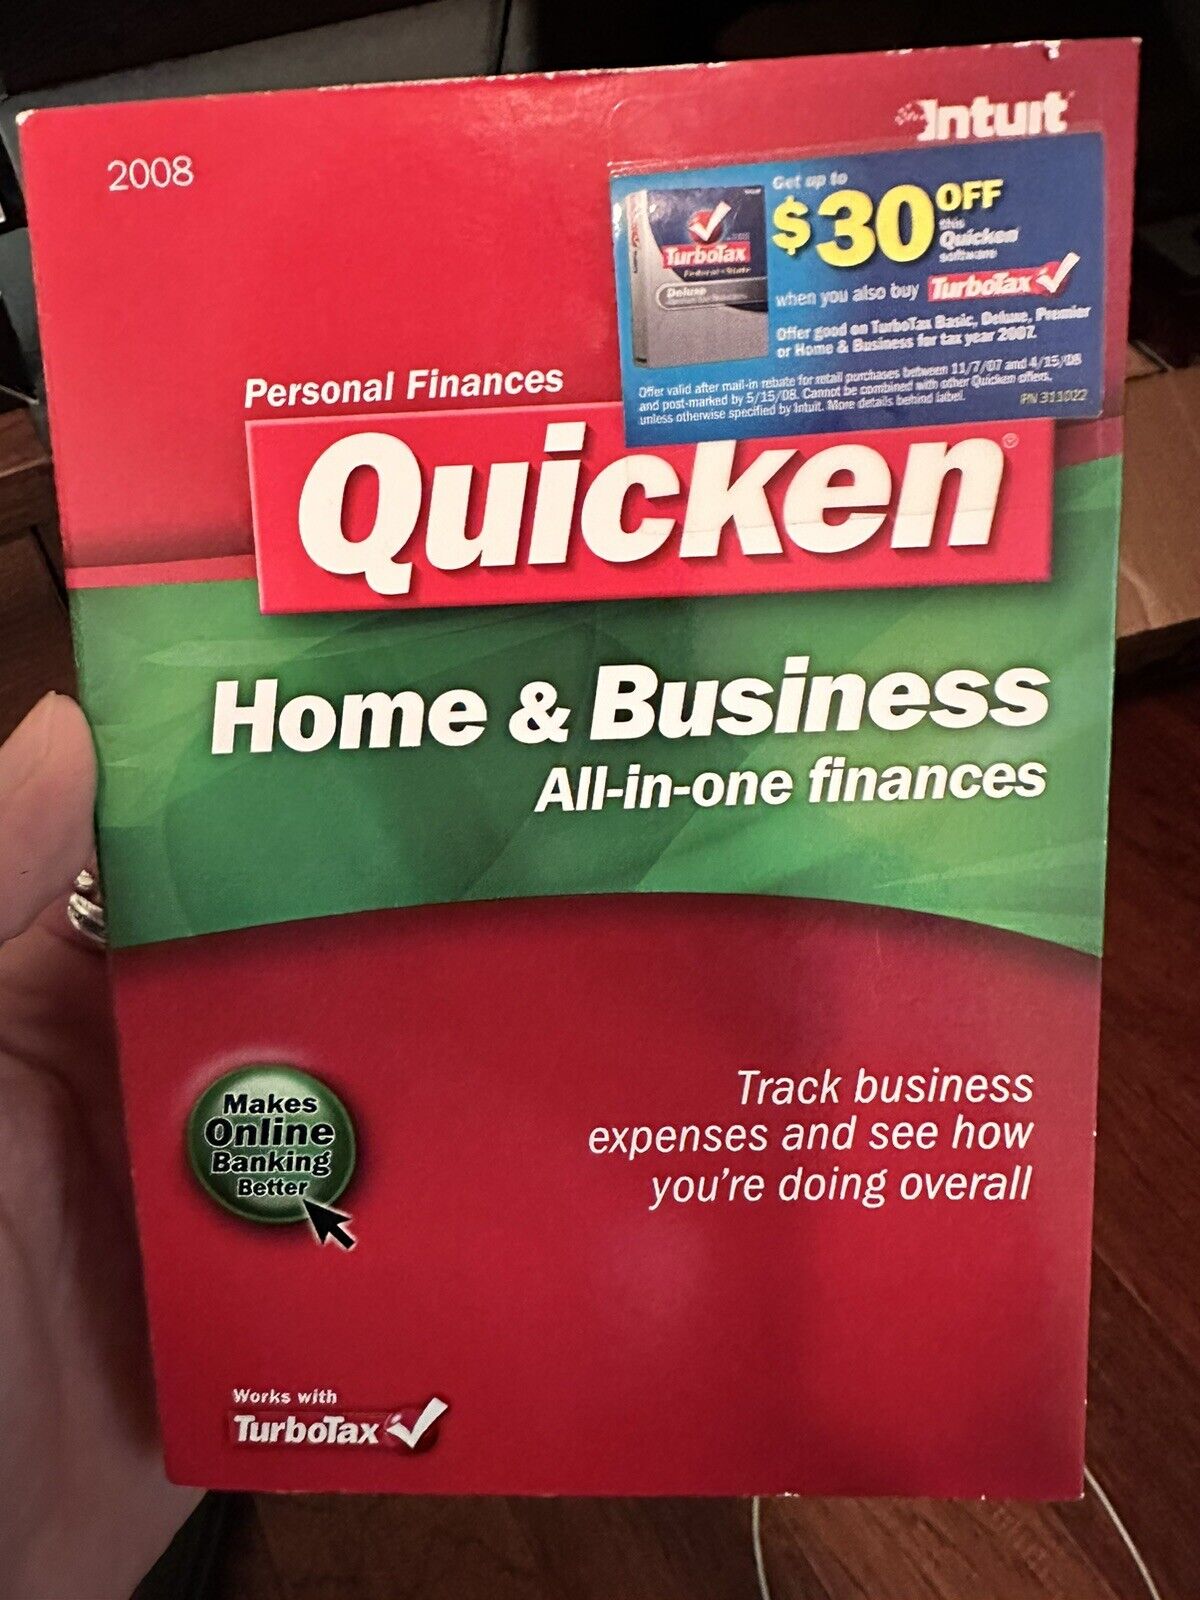 Intuit Quicken 2008 Home & Business For Windows (New Factory sealed retail box)